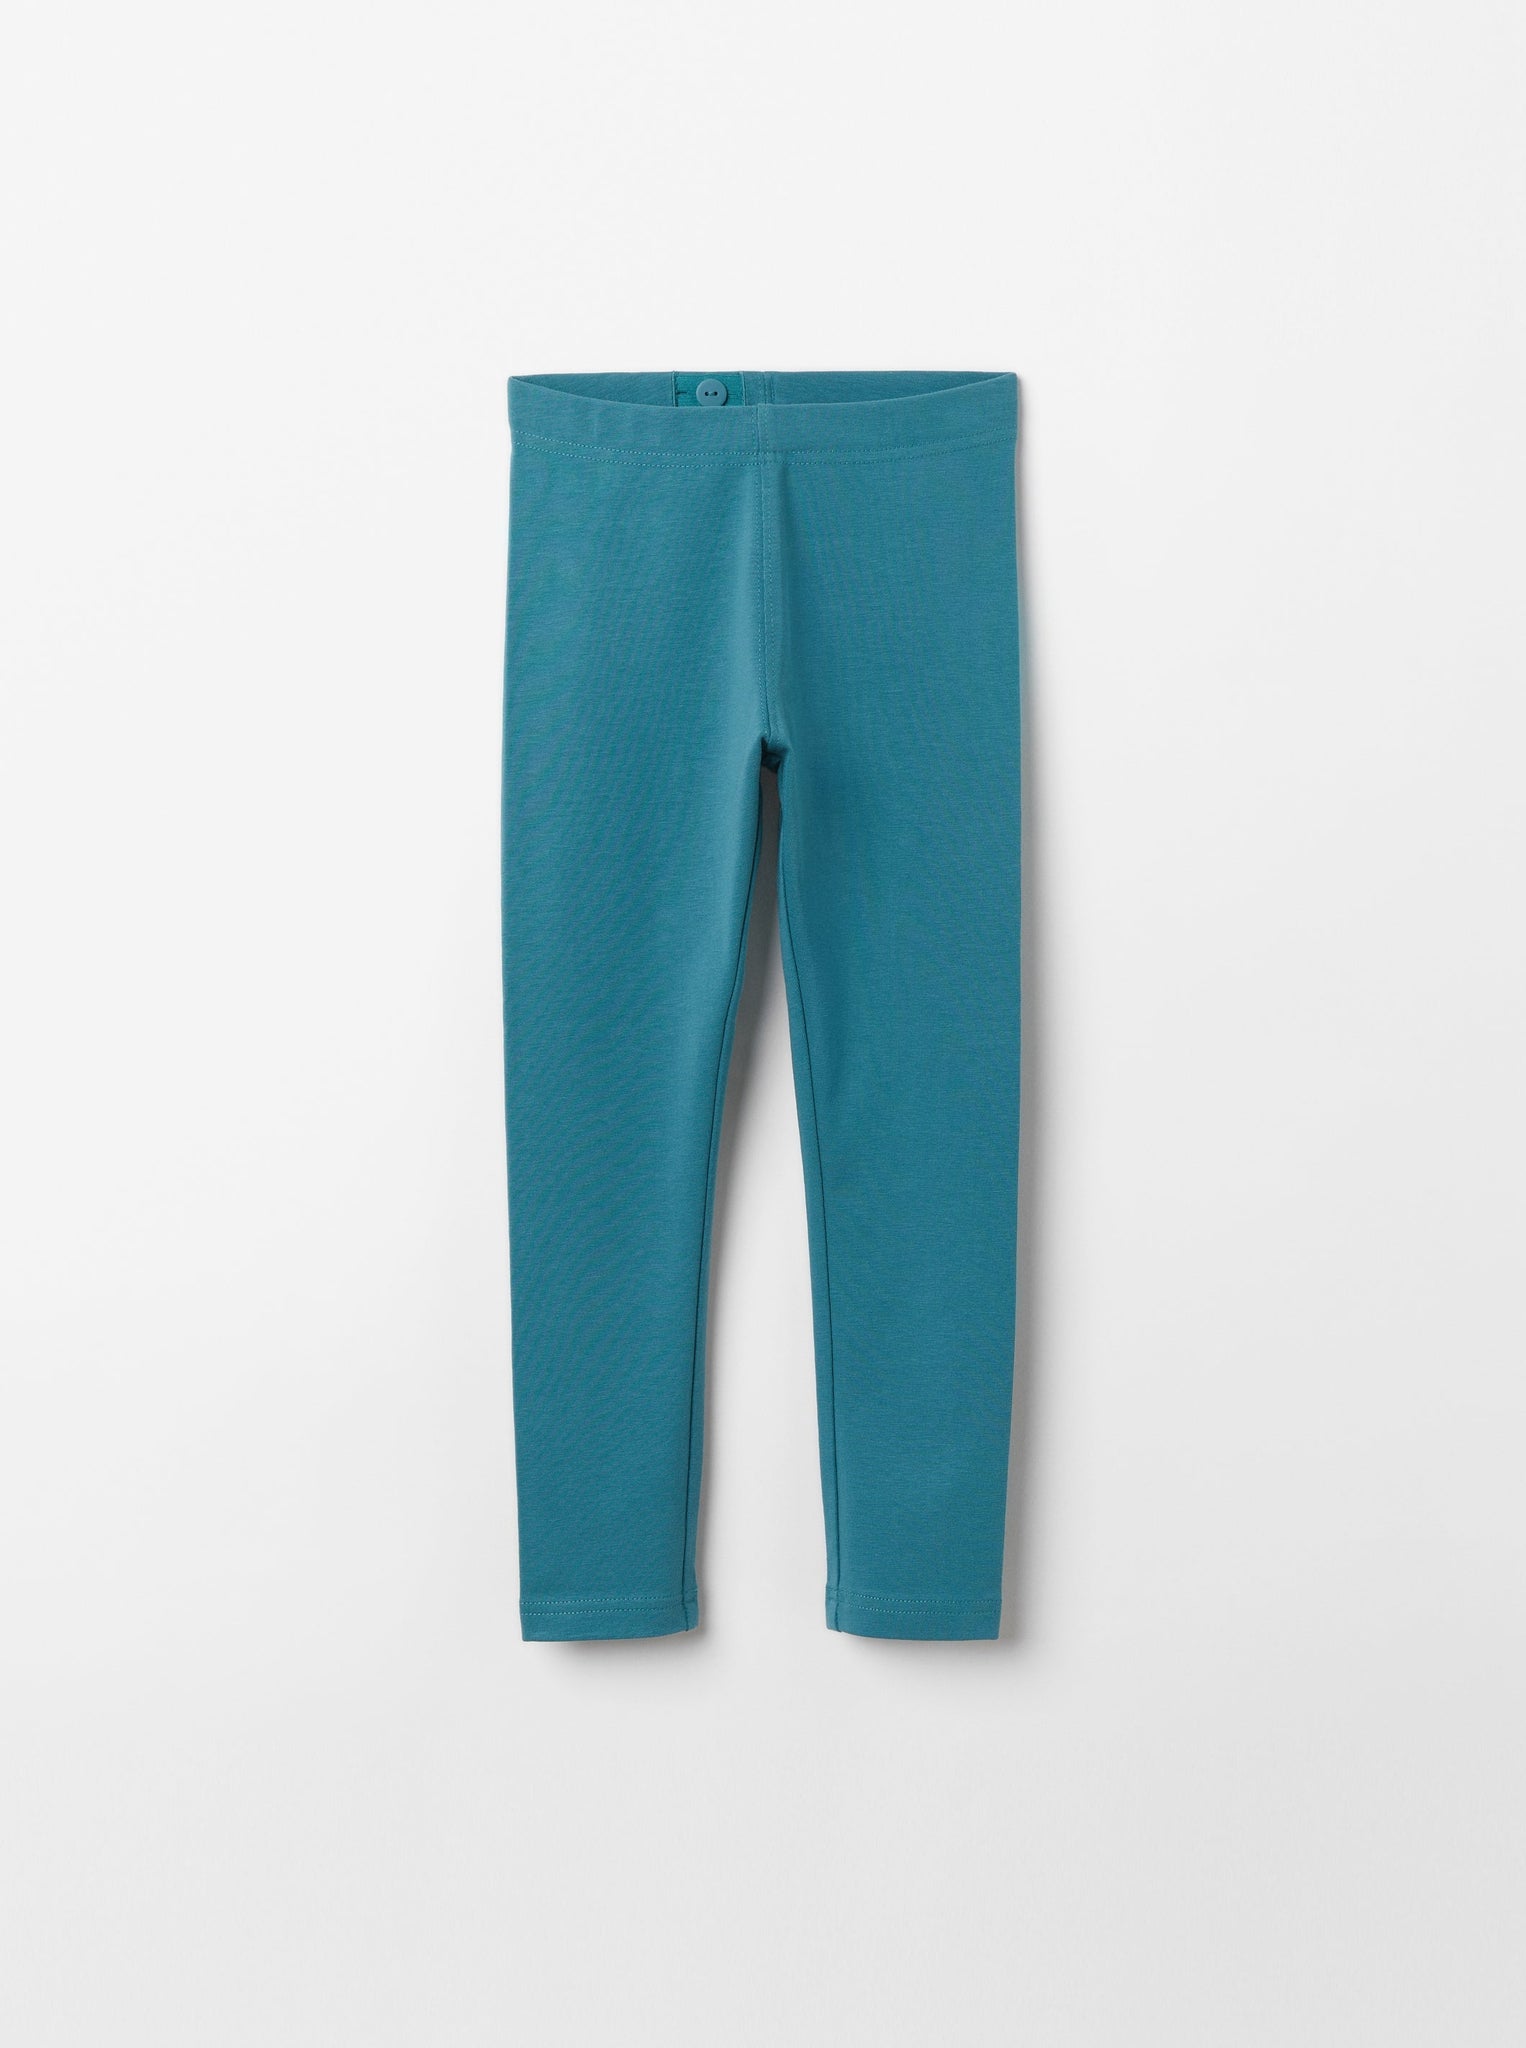 Organic Cotton Blue Kids Leggings from the Polarn O. Pyret kidswear collection. Clothes made using sustainably sourced materials.